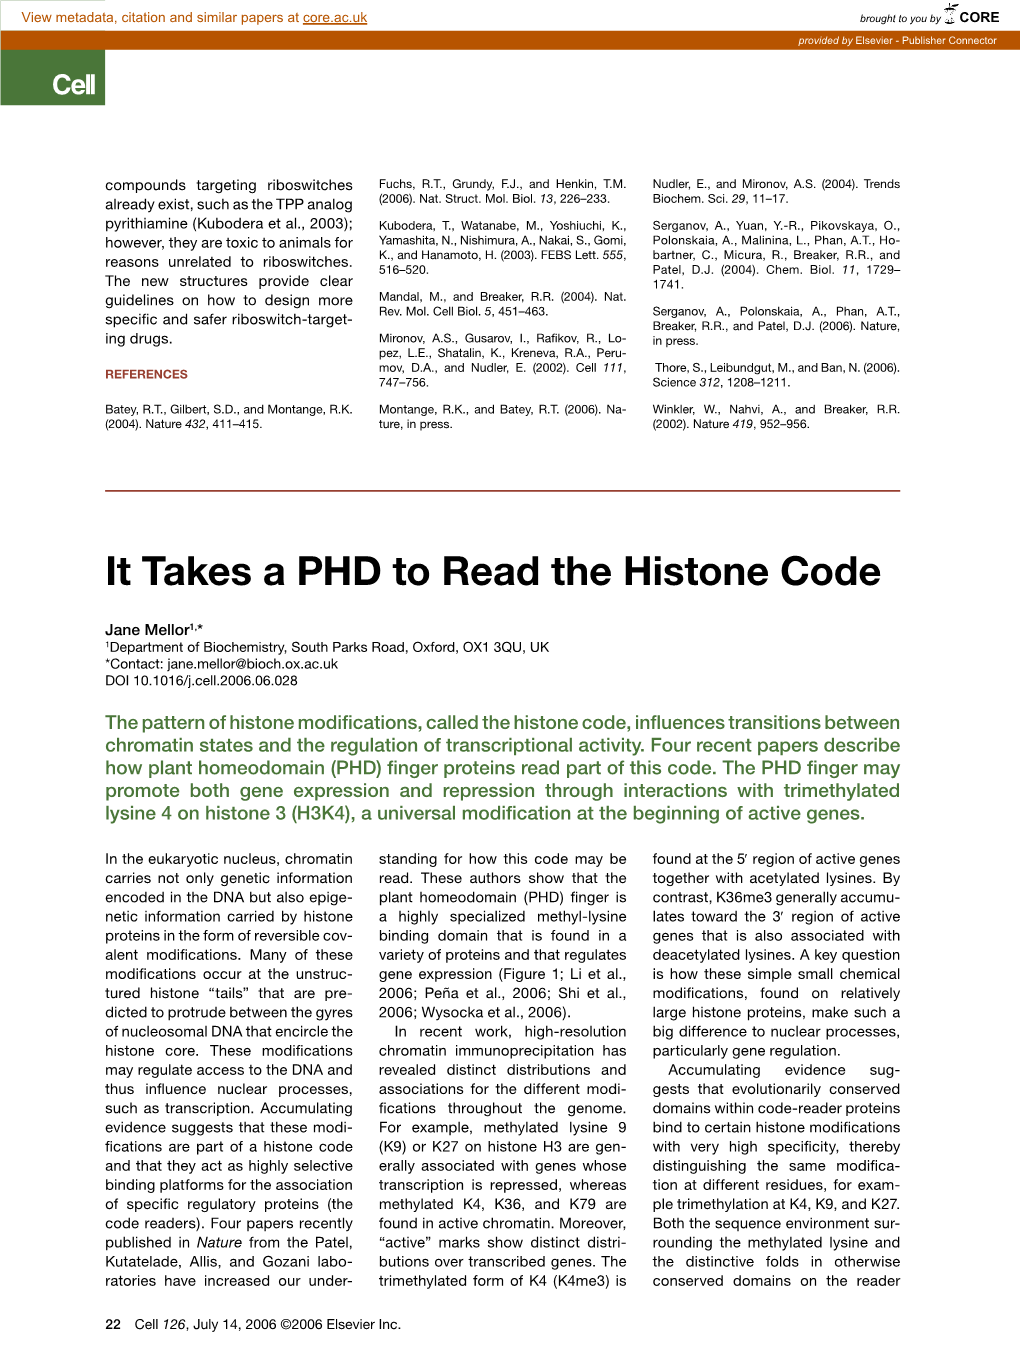 It Takes a PHD to Read the Histone Code